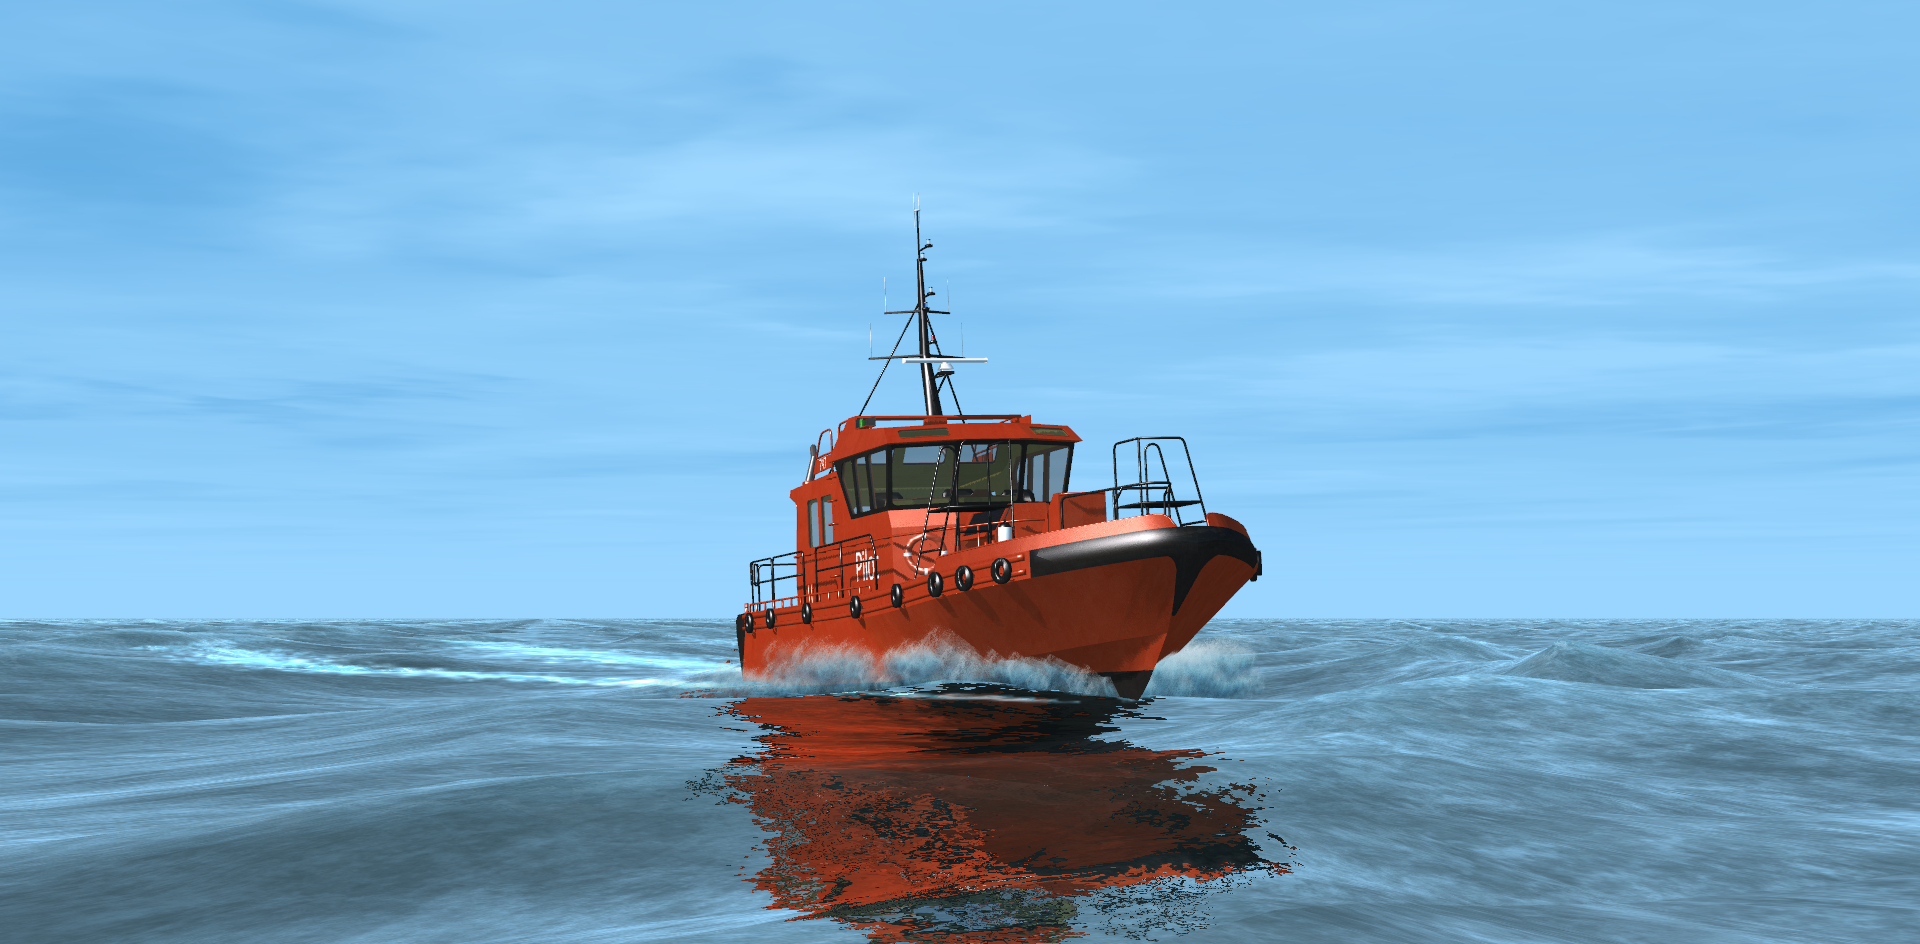 Update on the Pilot Boat 747